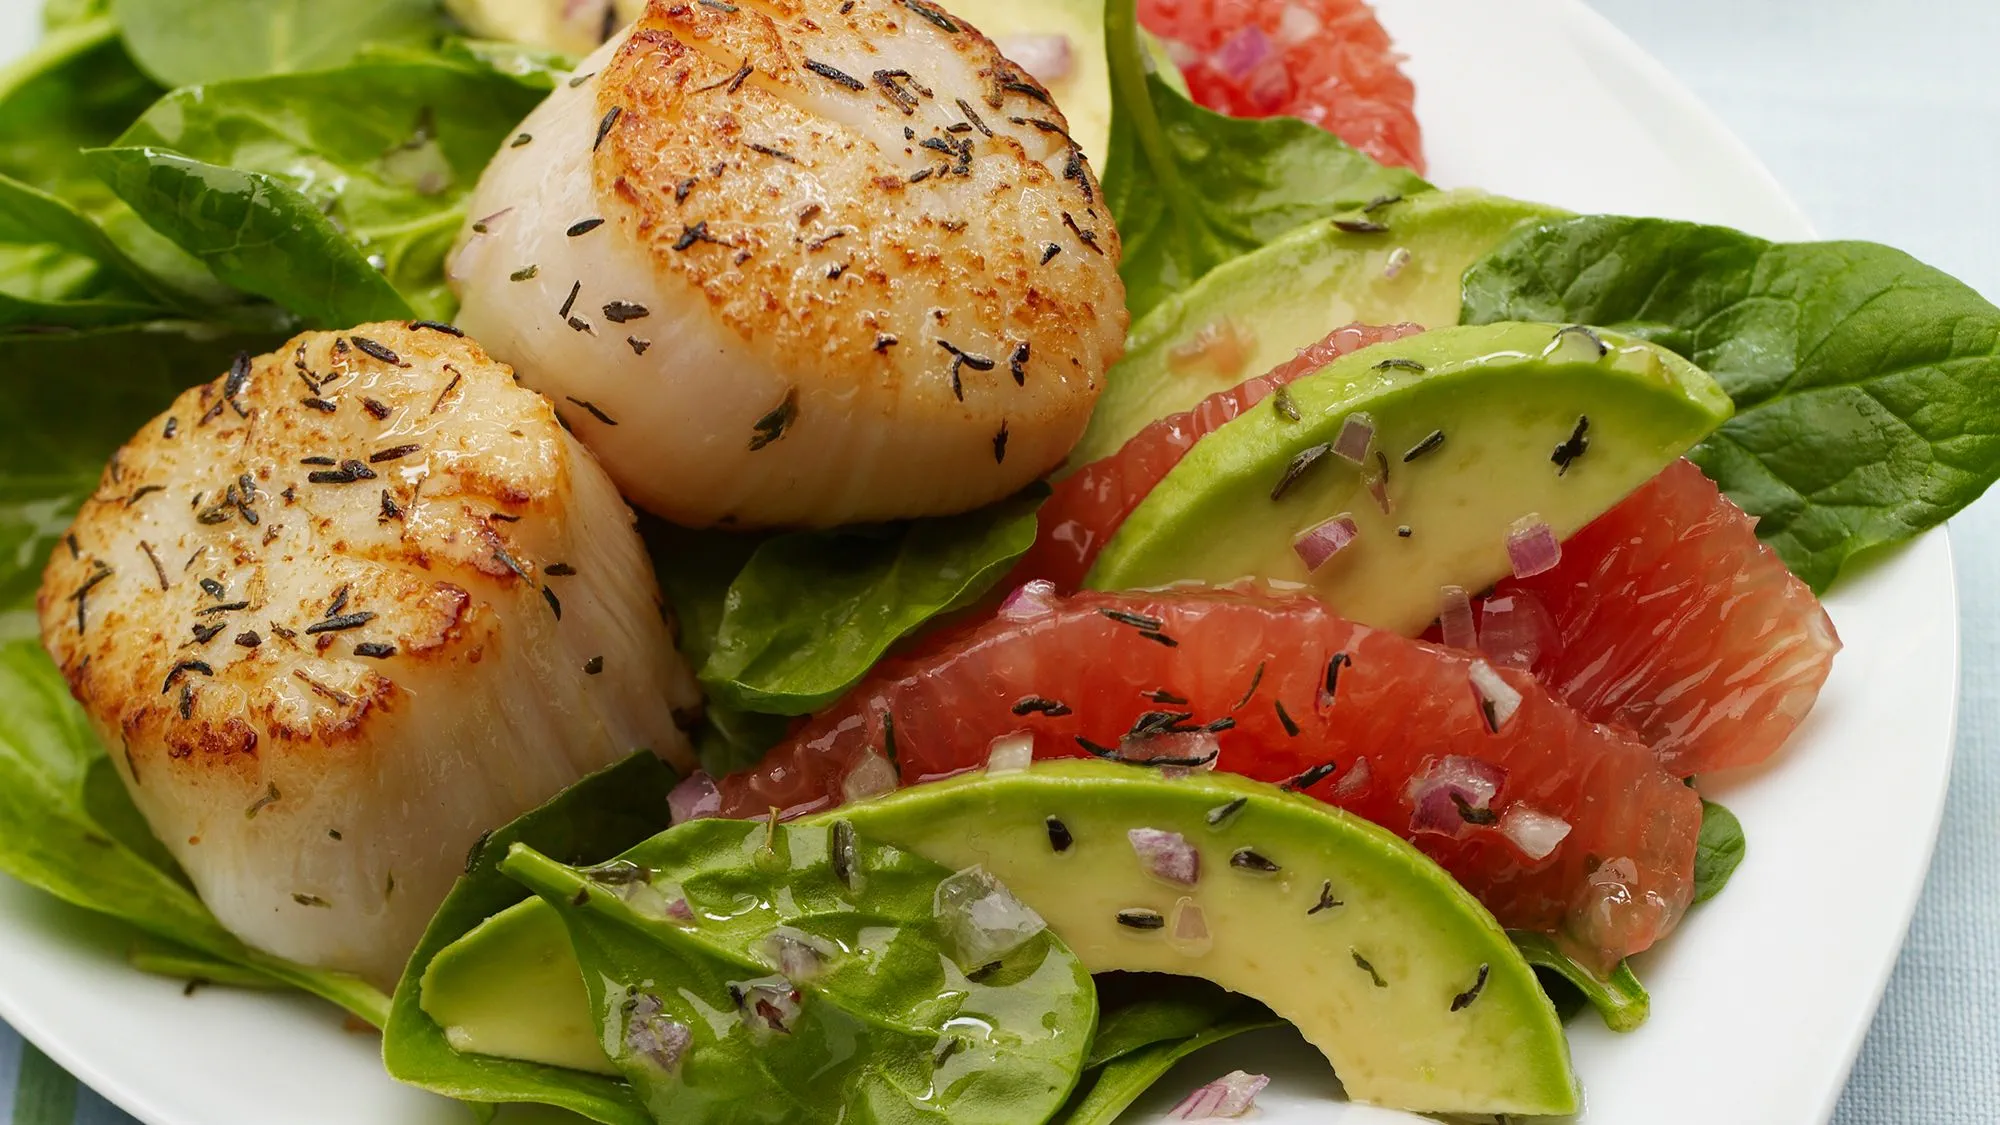 SEARED SCALLOPS WITH RED GRAPEFRUIT AVOCADO SALAD